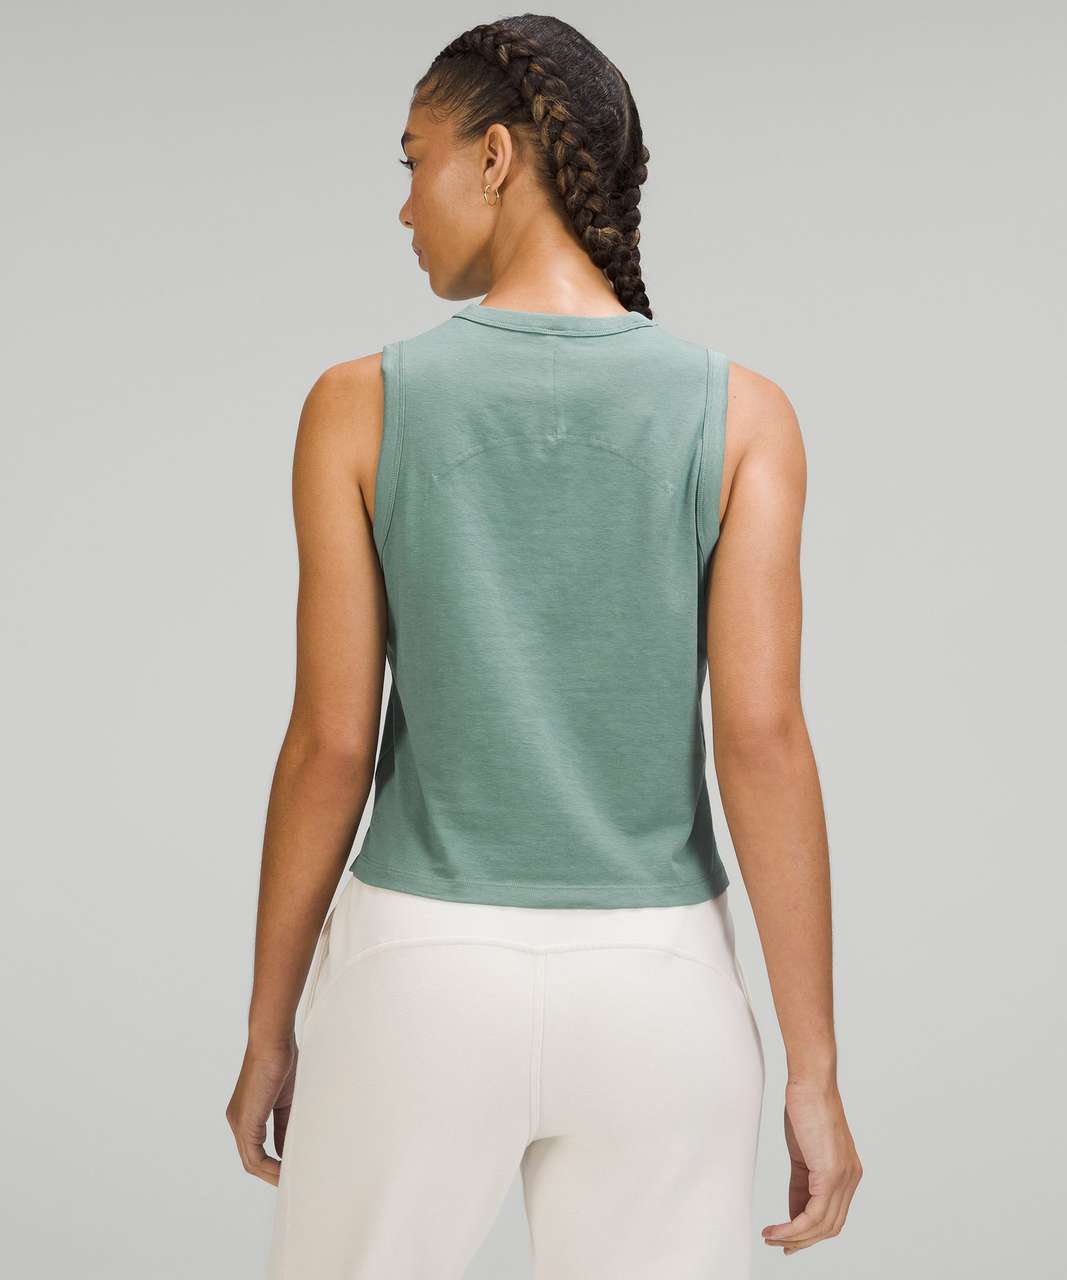 Lululemon Classic-Fit Cotton-Blend Tank Top - Tidewater Teal